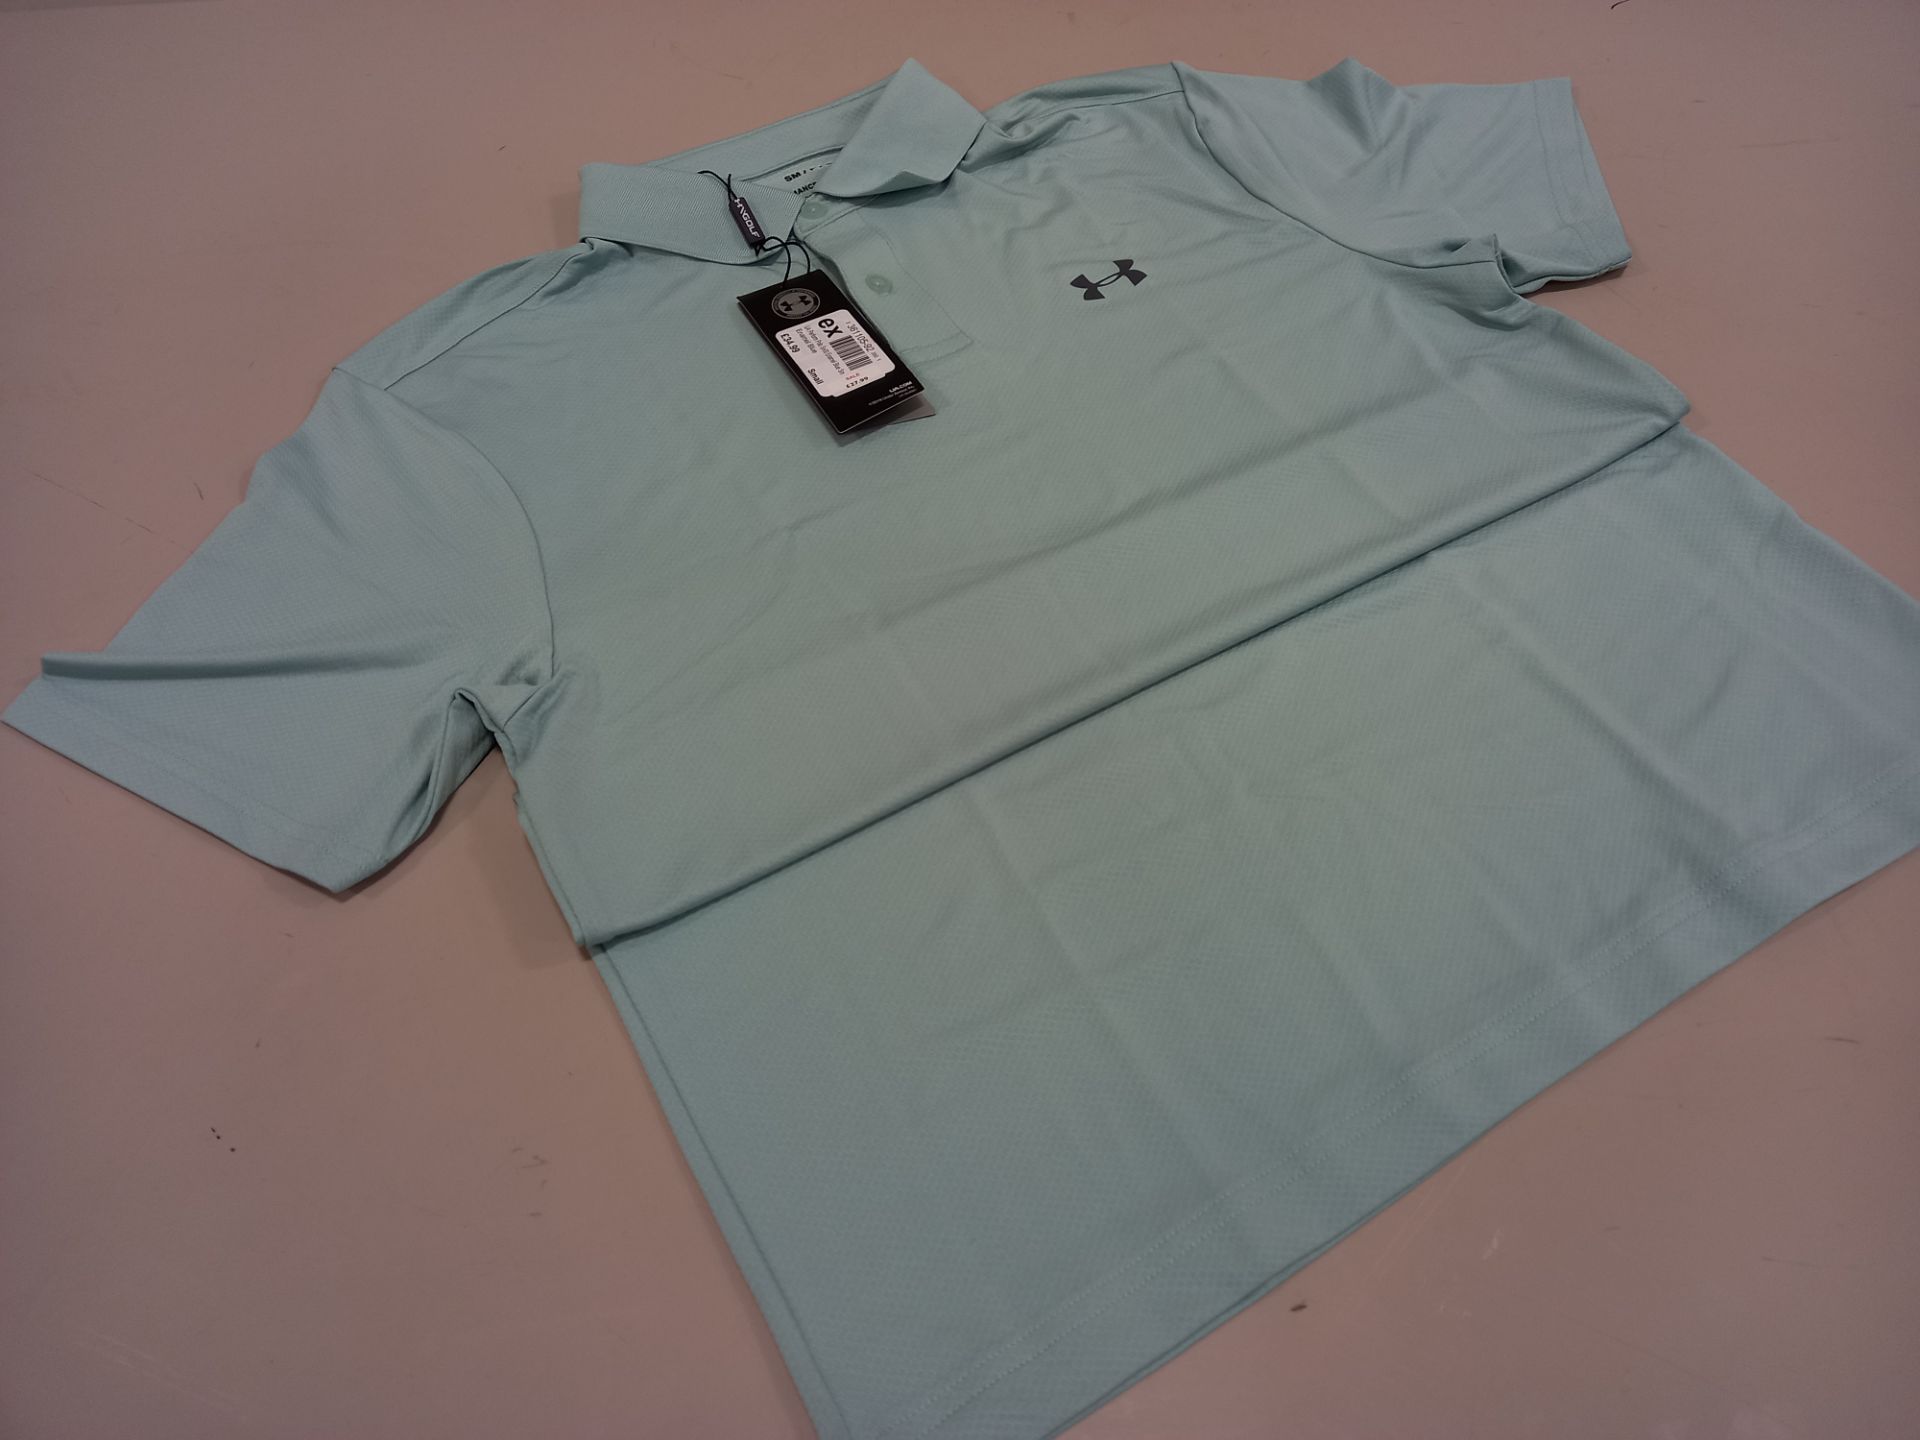 15 X BRAND NEW UNDER ARMOUR BAGGED PERFORM POLO SHIRT SIZE LARGE (PICK LOOSE)